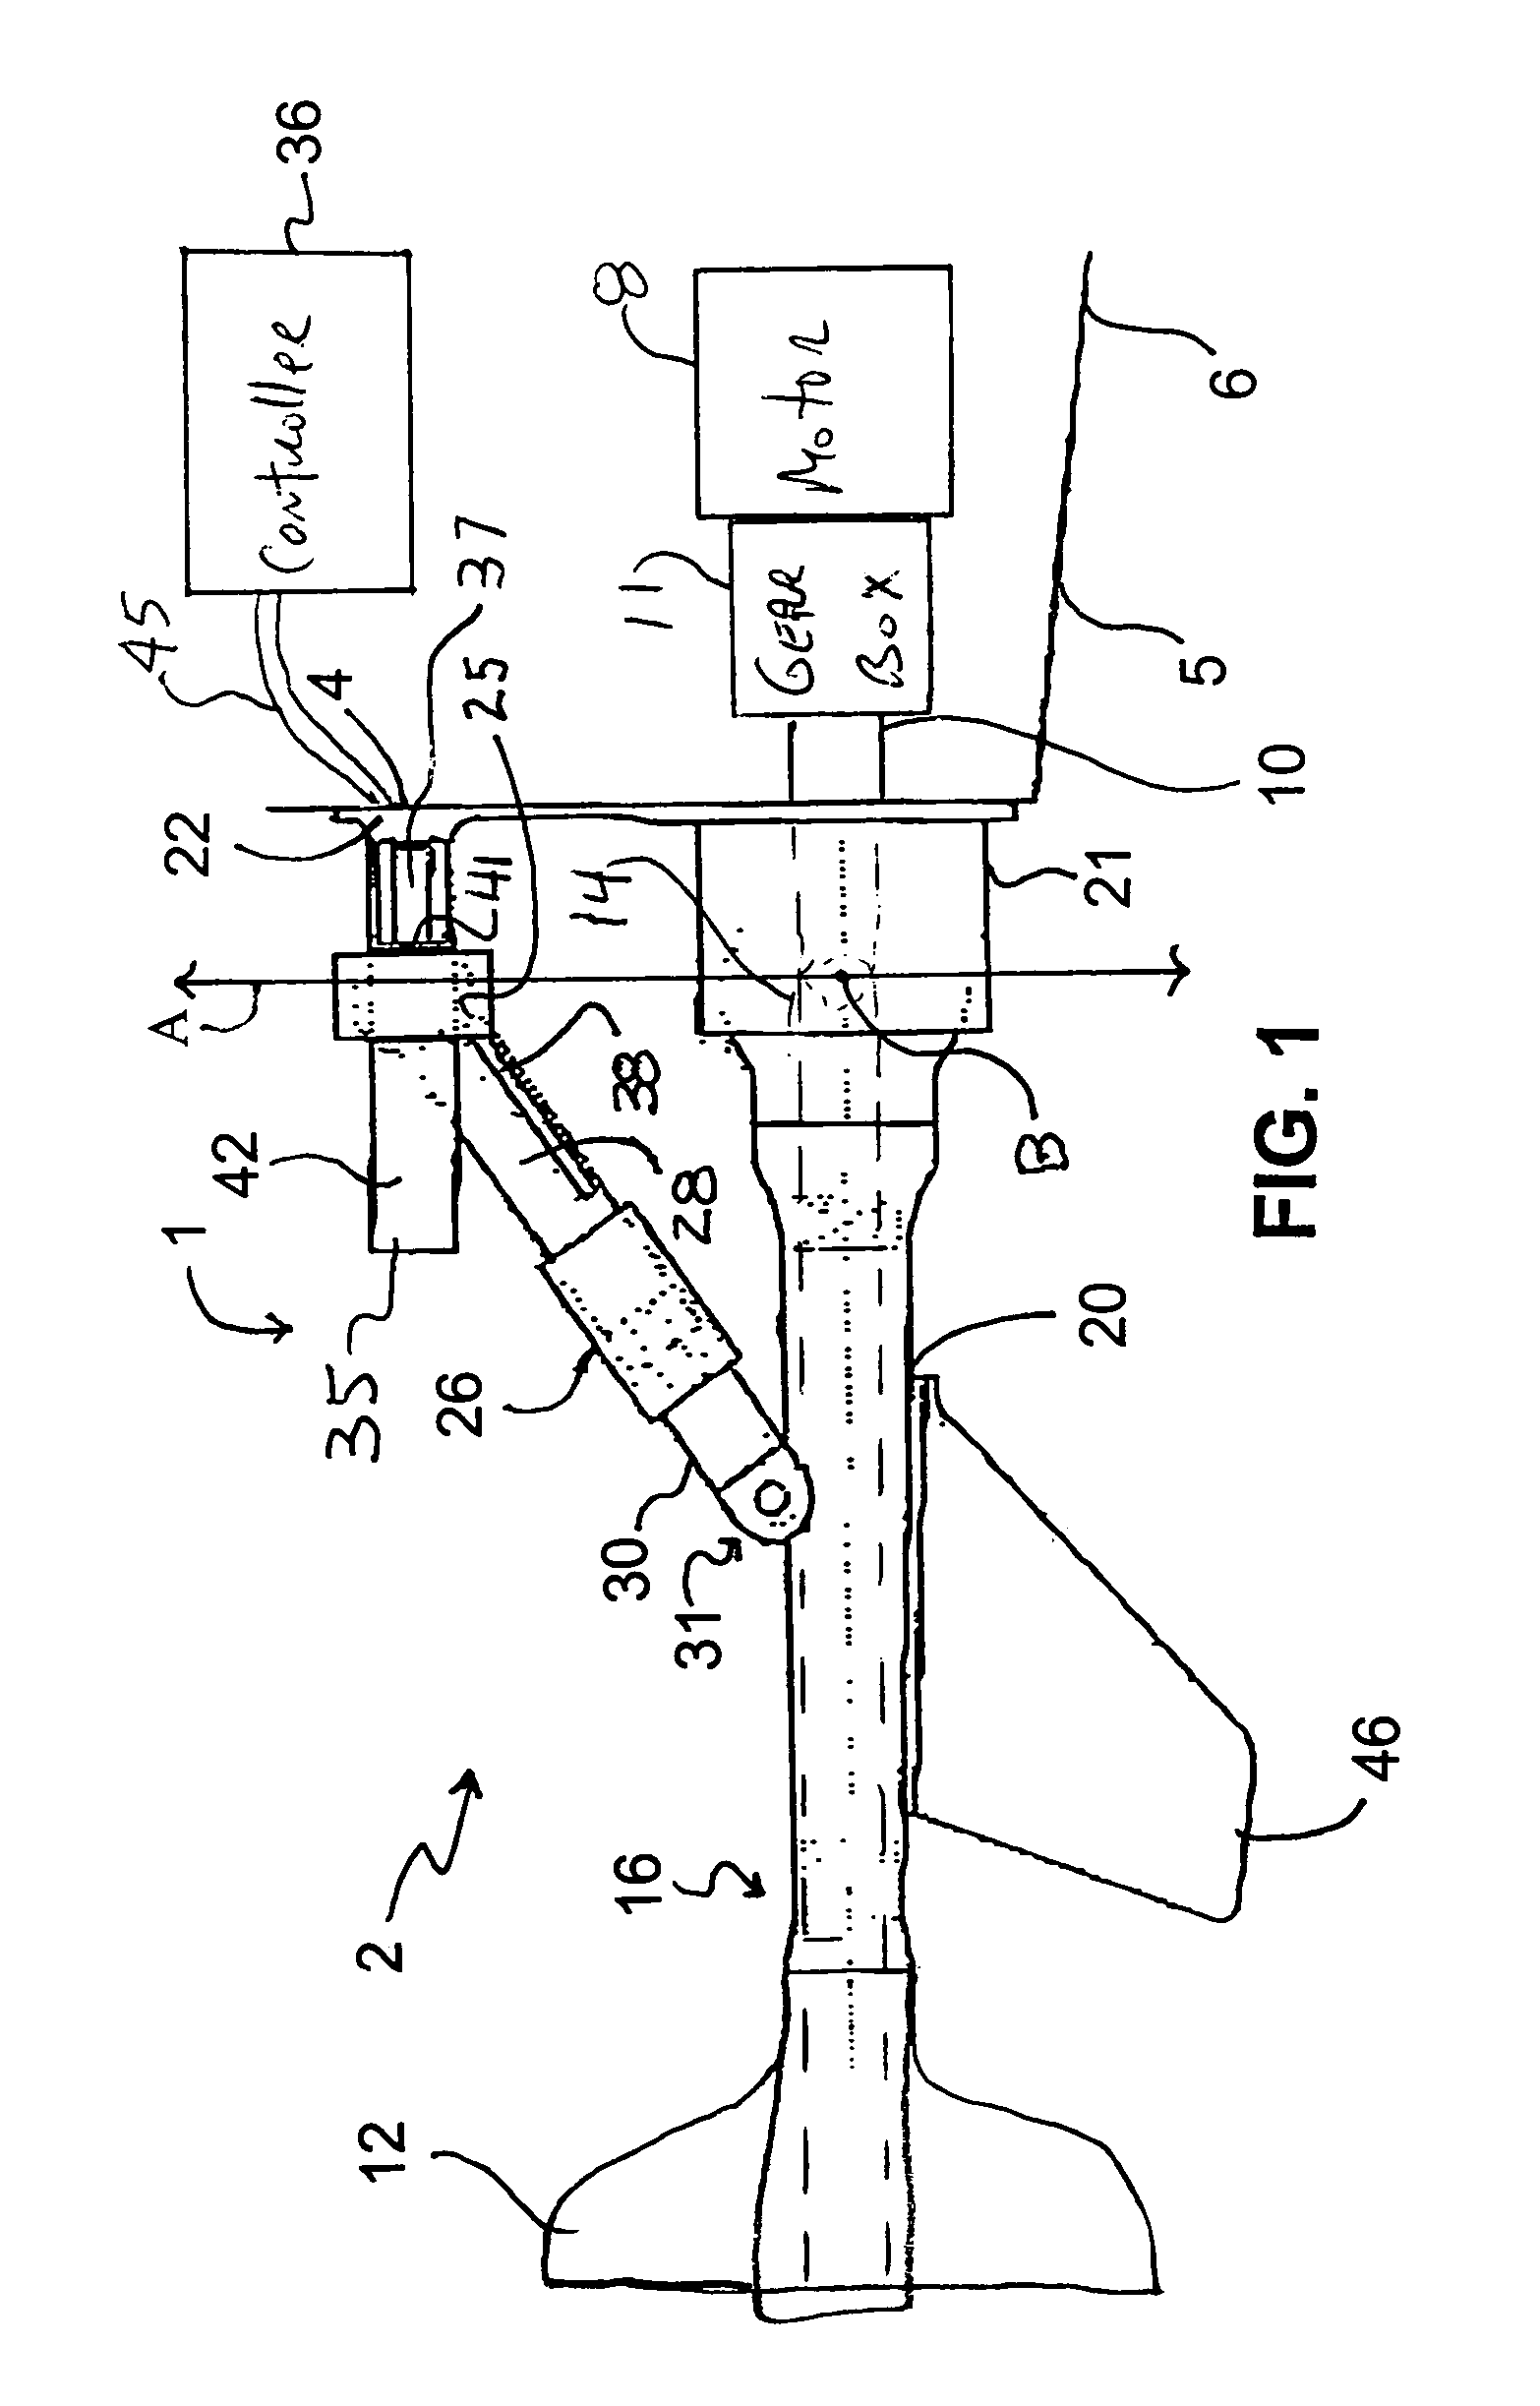 Trim apparatus for marine outdrive with steering capability